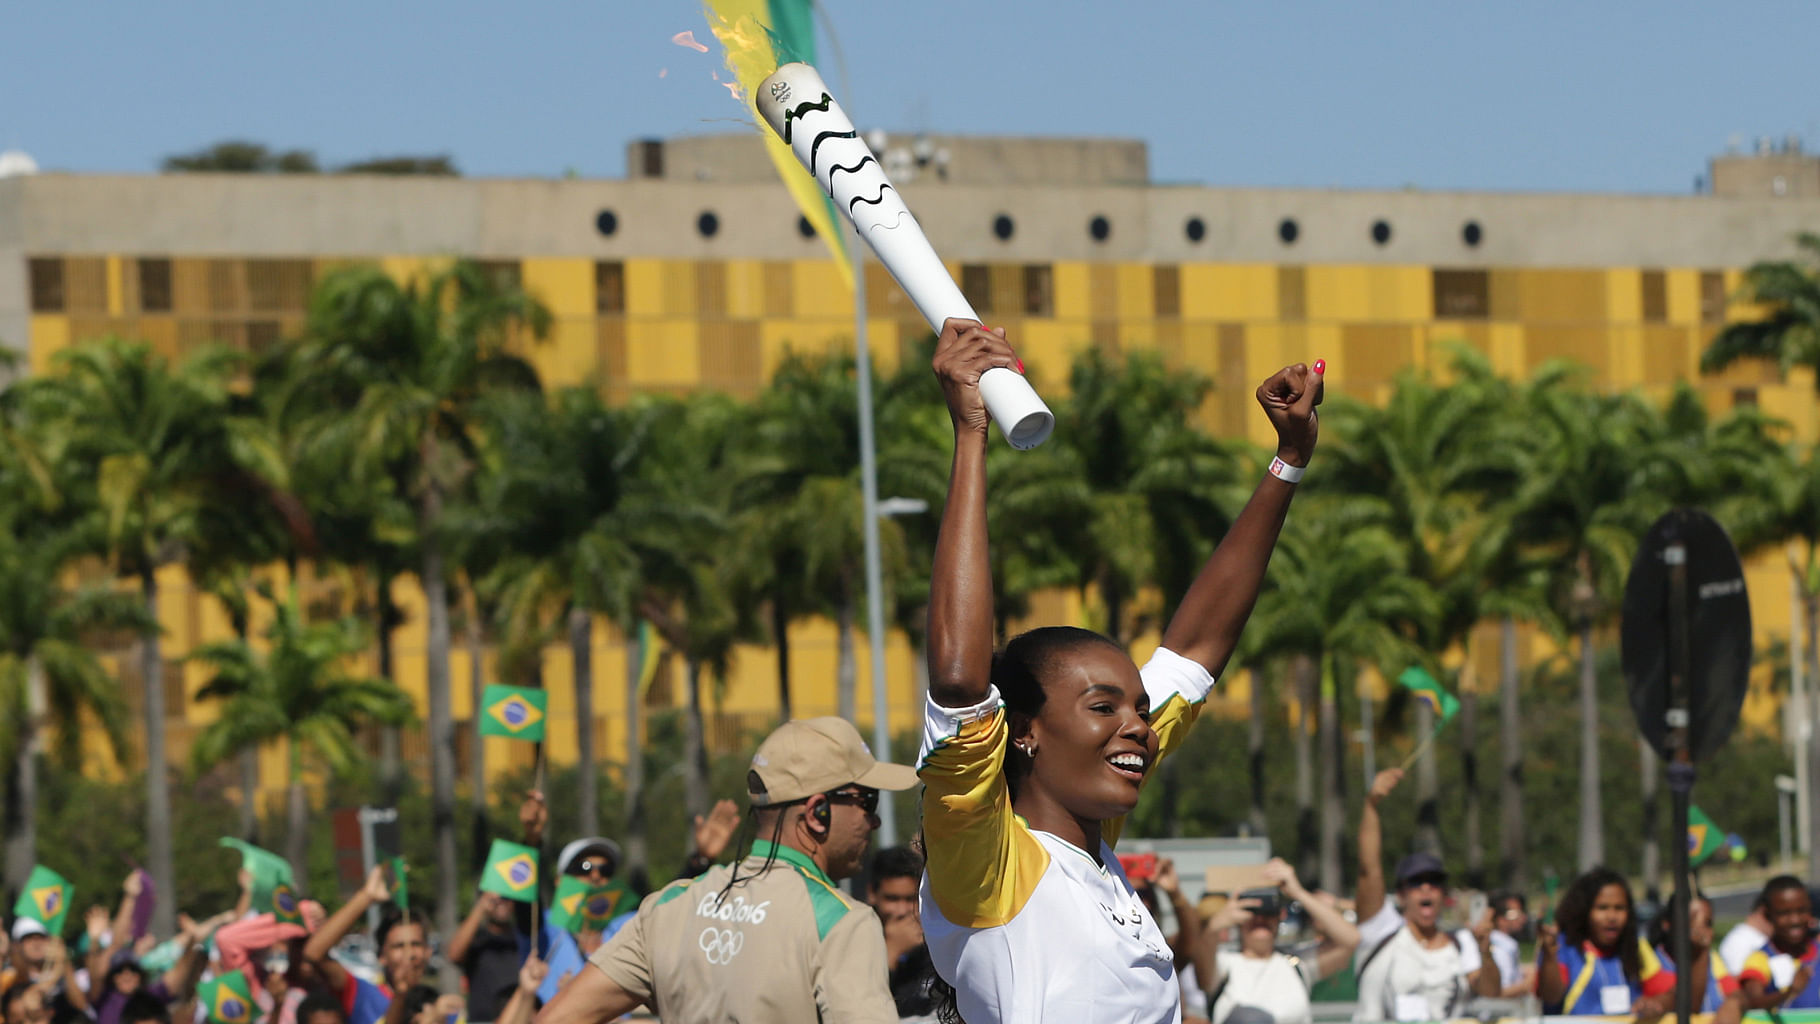 Brazilian volleyball player Fabiana Claudino holds the Olympic torch after the torch lighting ceremony at Planalto presidential palace in Brasilia. (Photo: AP)